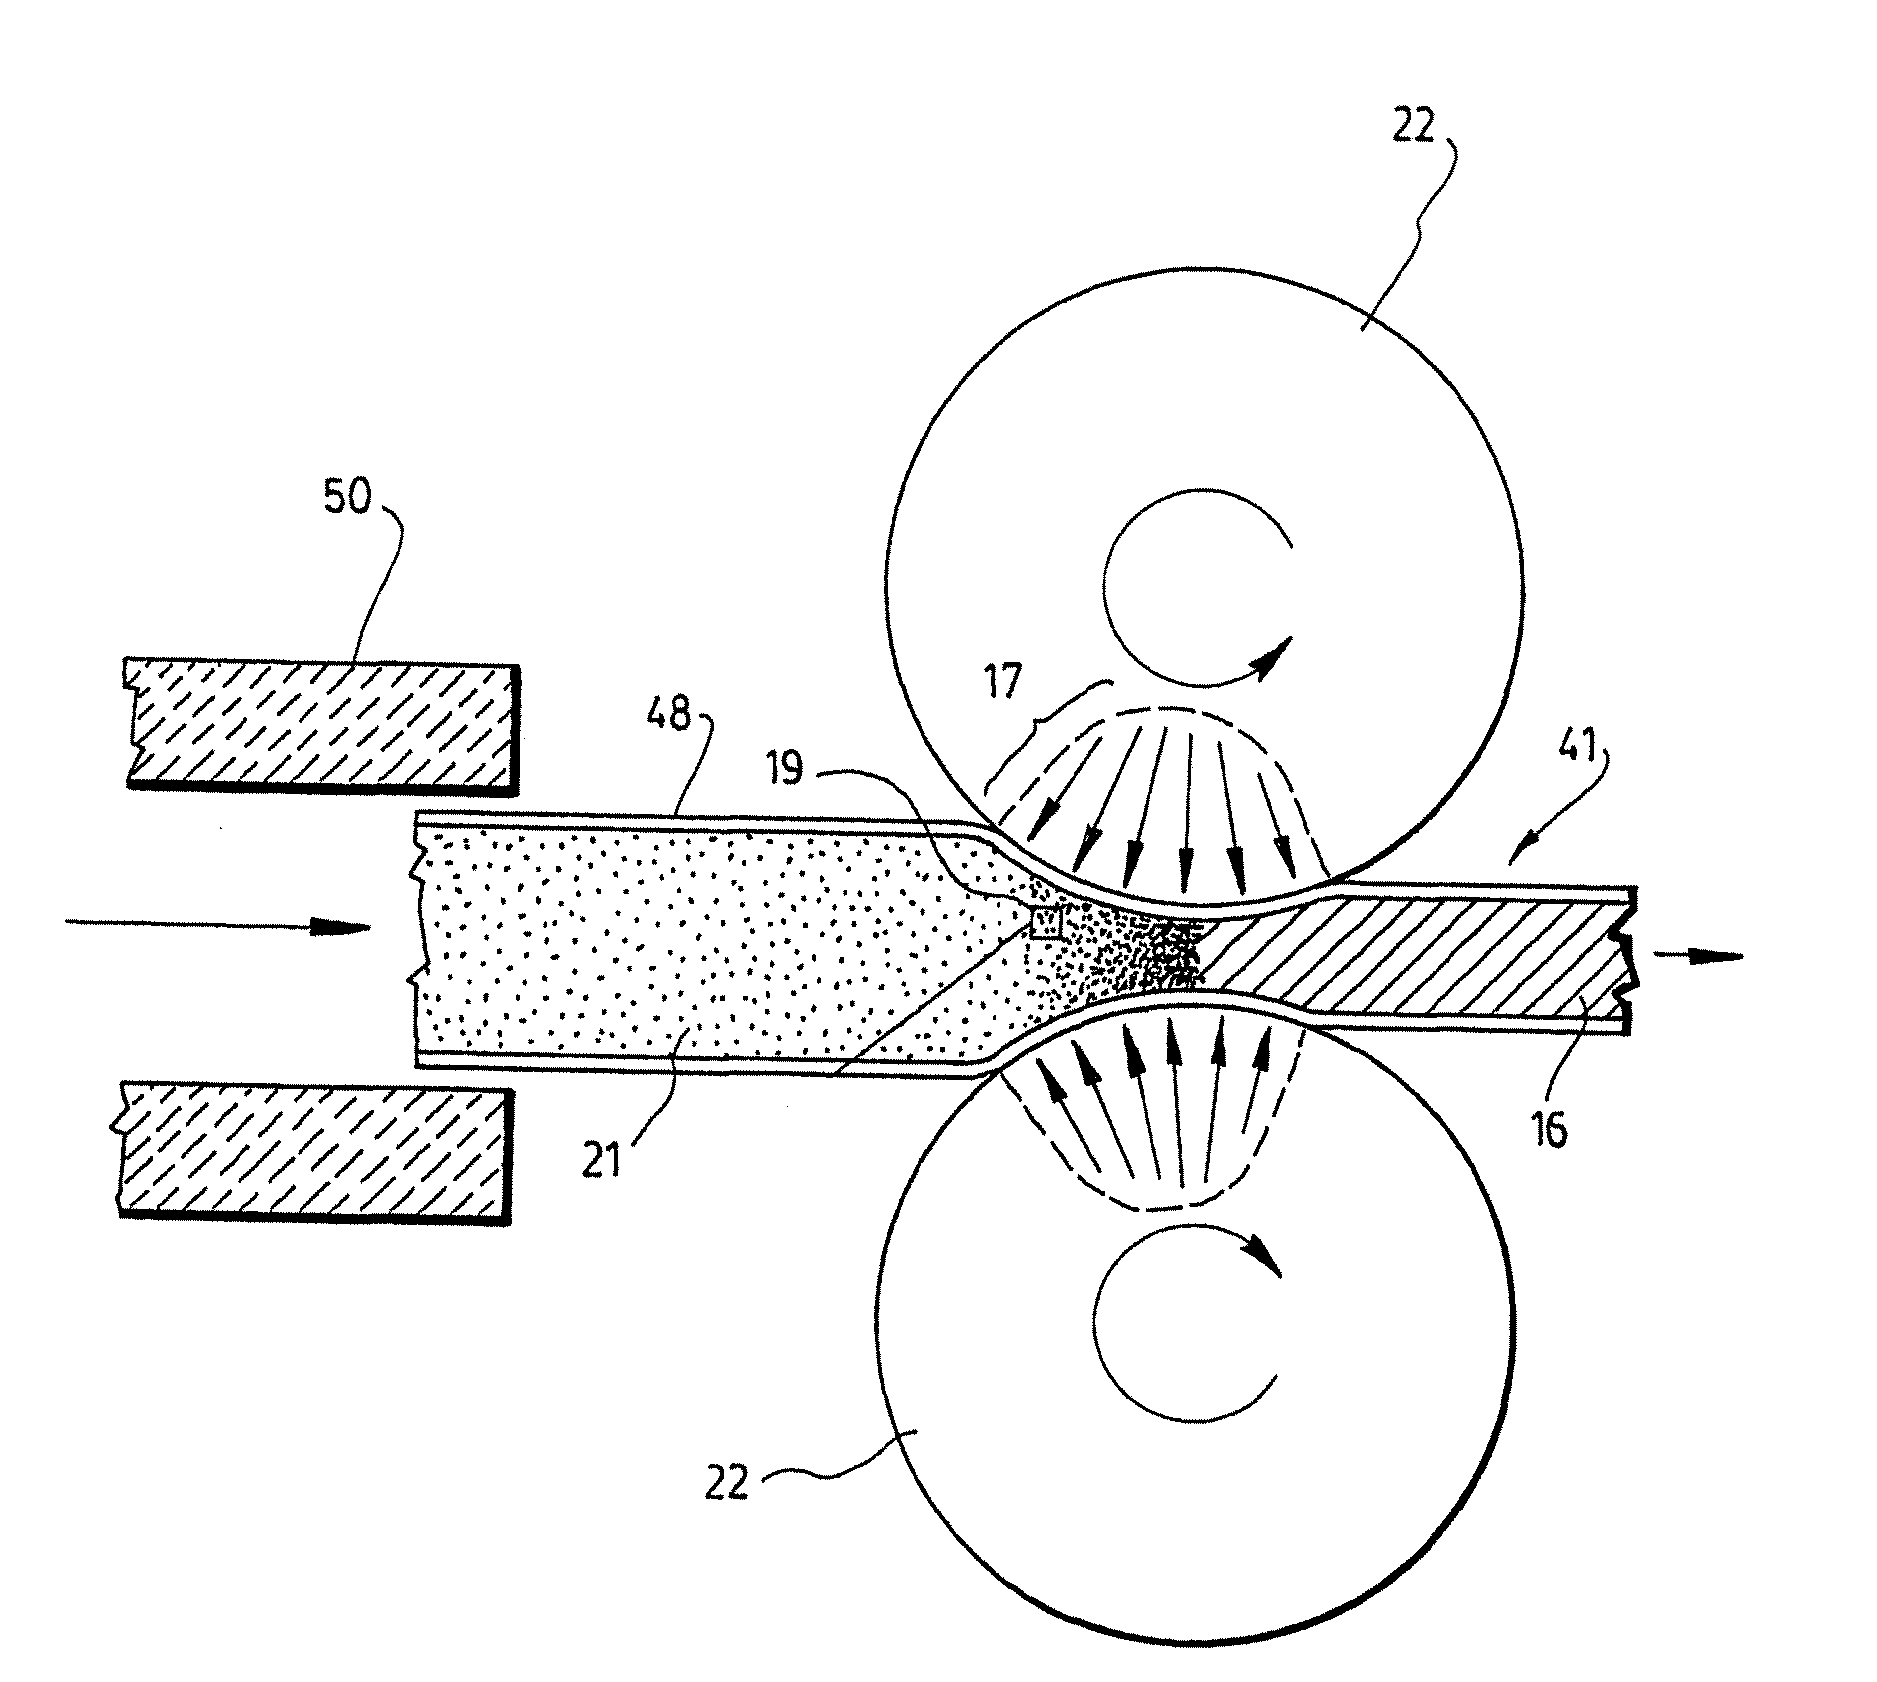 Method for production of metal foam or metal-composite bodies